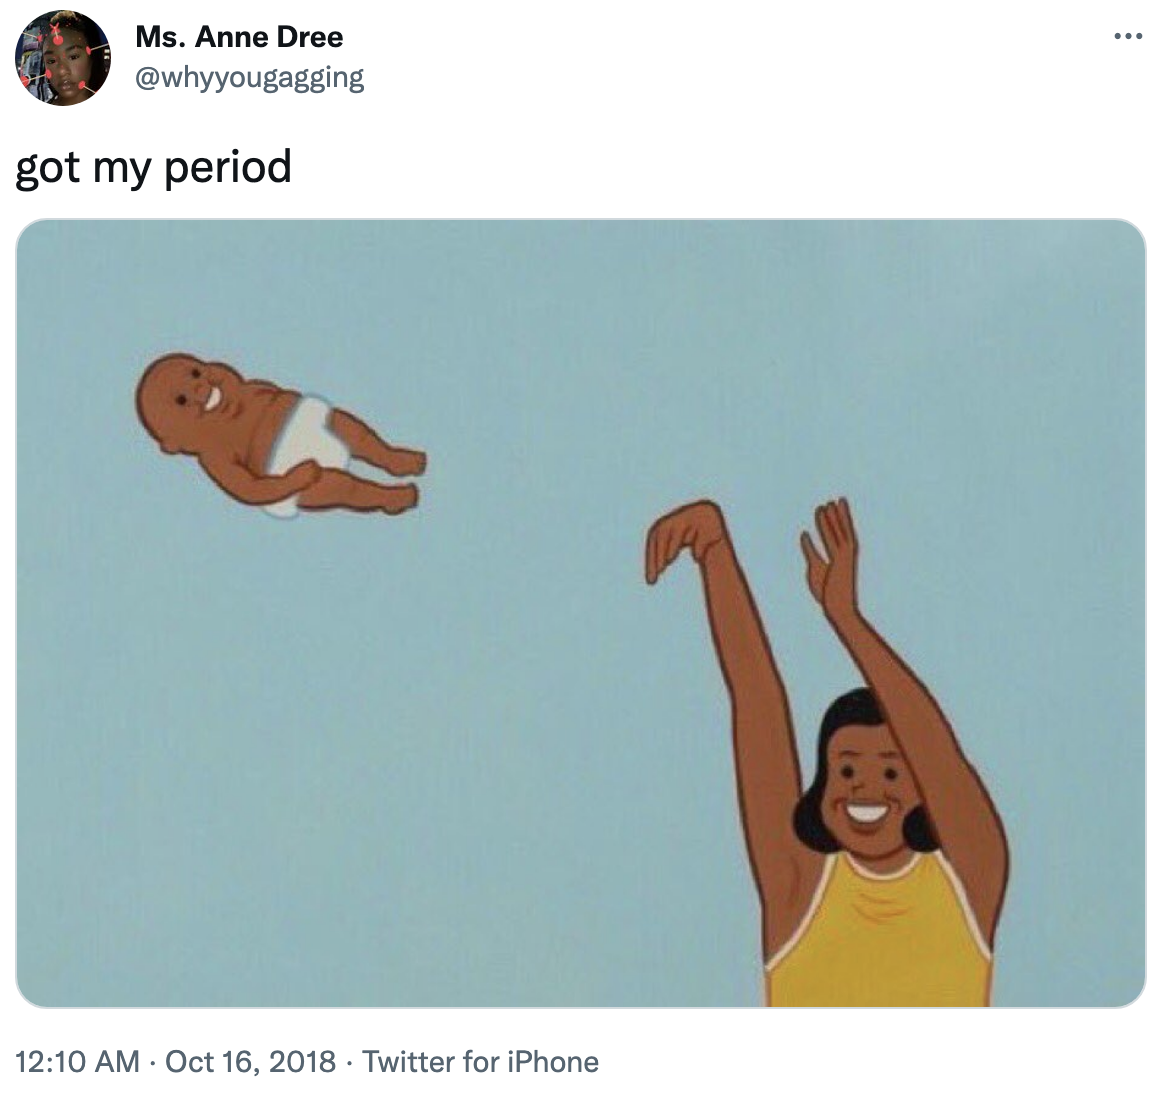 &quot;got my period&quot; with a photo shared of a cartoon woman tossing a baby in the air